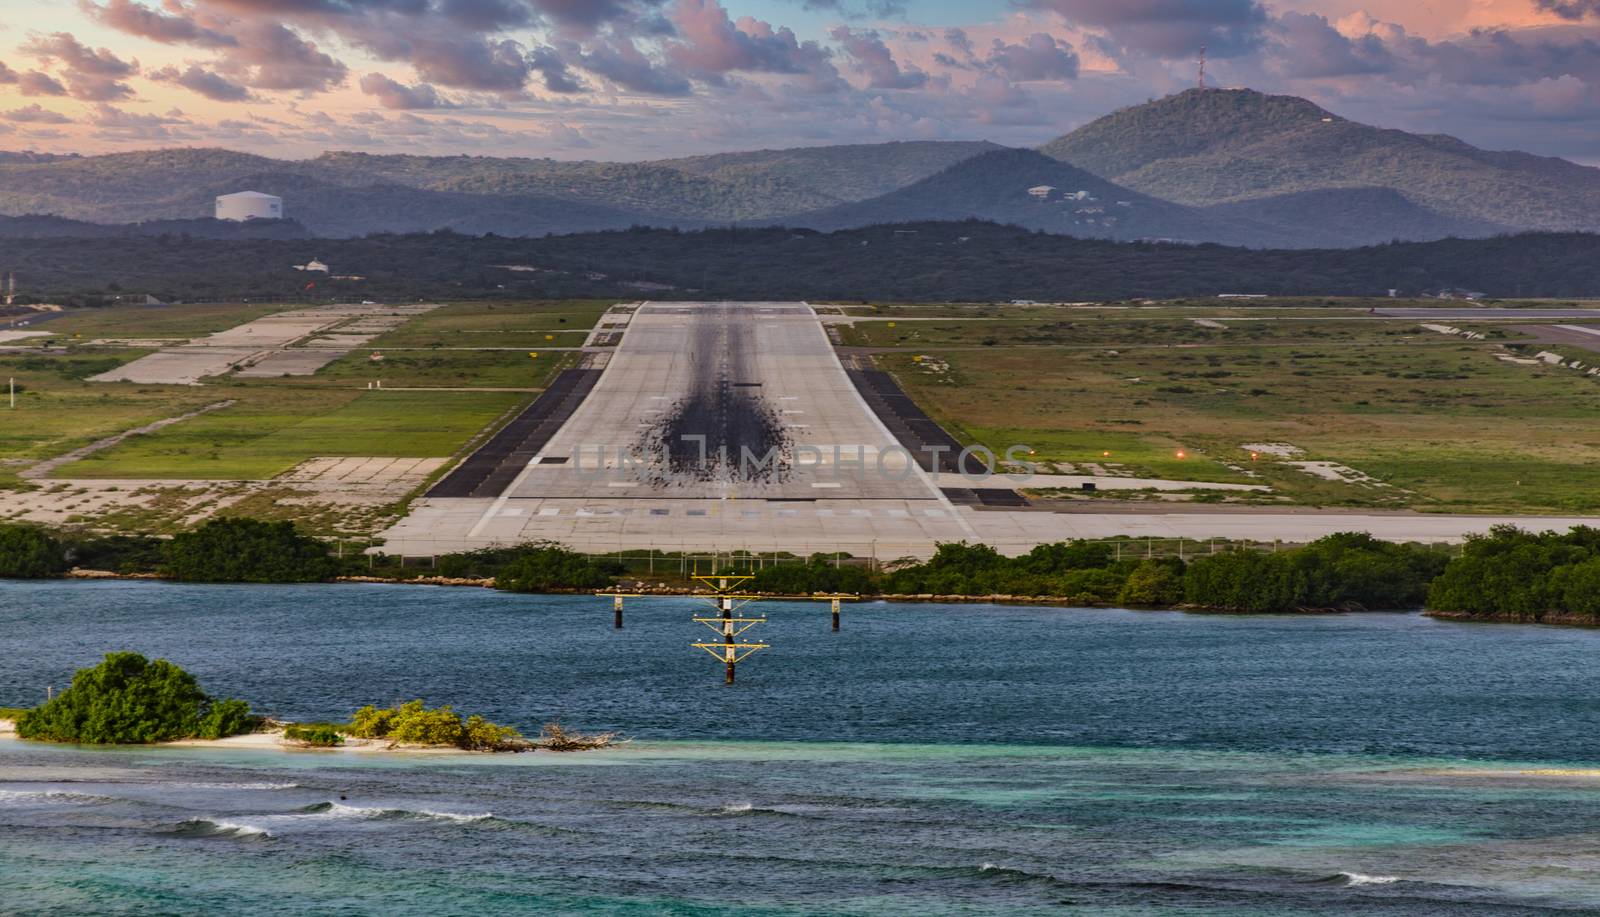 End of Runway of Aruba Airport by dbvirago